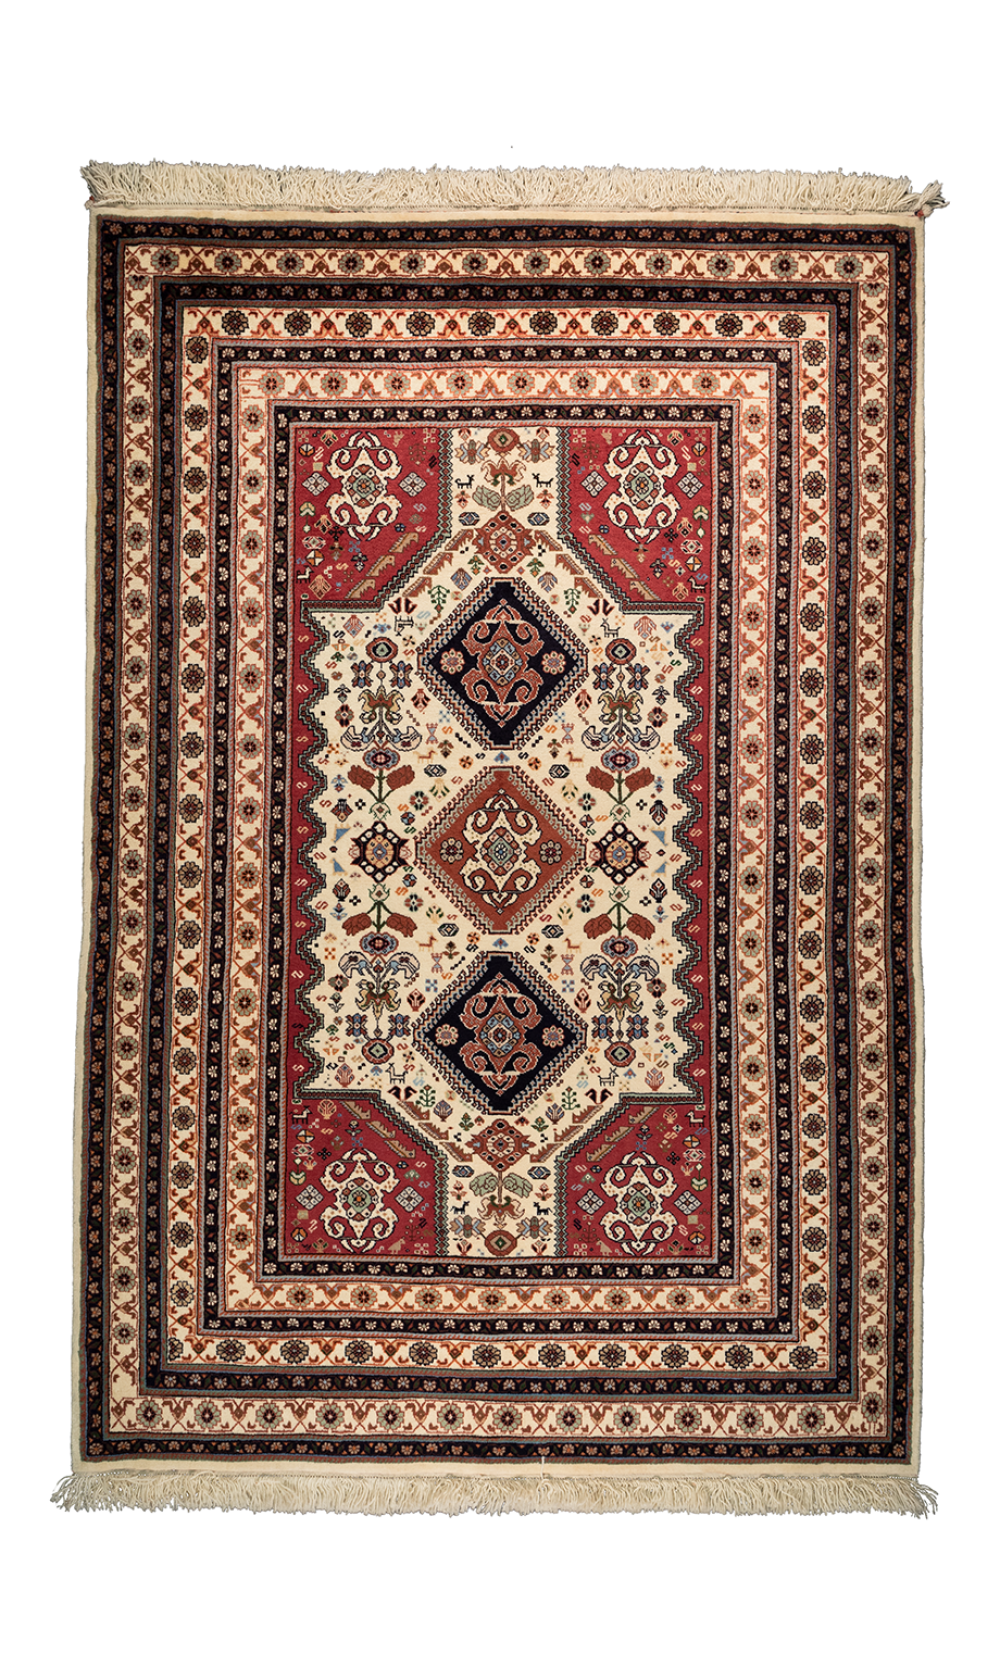 Handmade Wool Rug in Cream Color Fars | 220×146 cm | TALFIGHY (Mix of Two or More Designs) Pattern